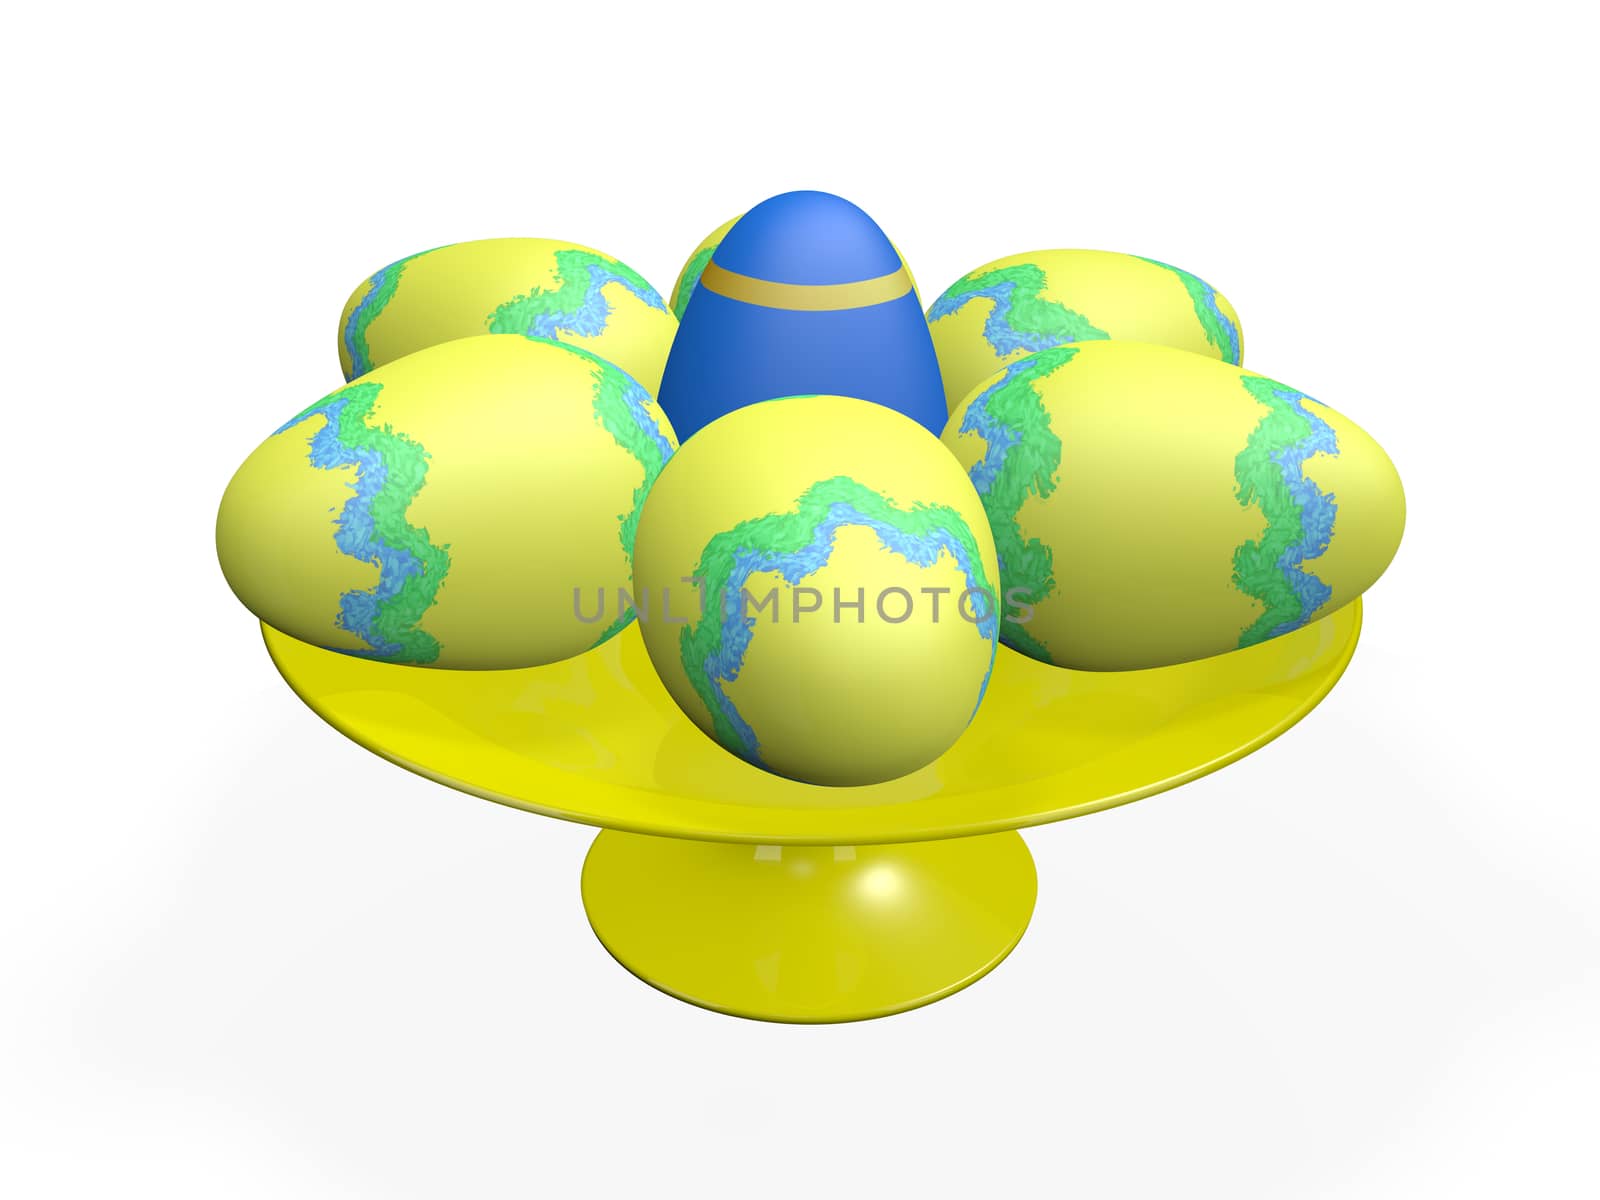 Painted Easter Sunday eggs on a yellow display platter
